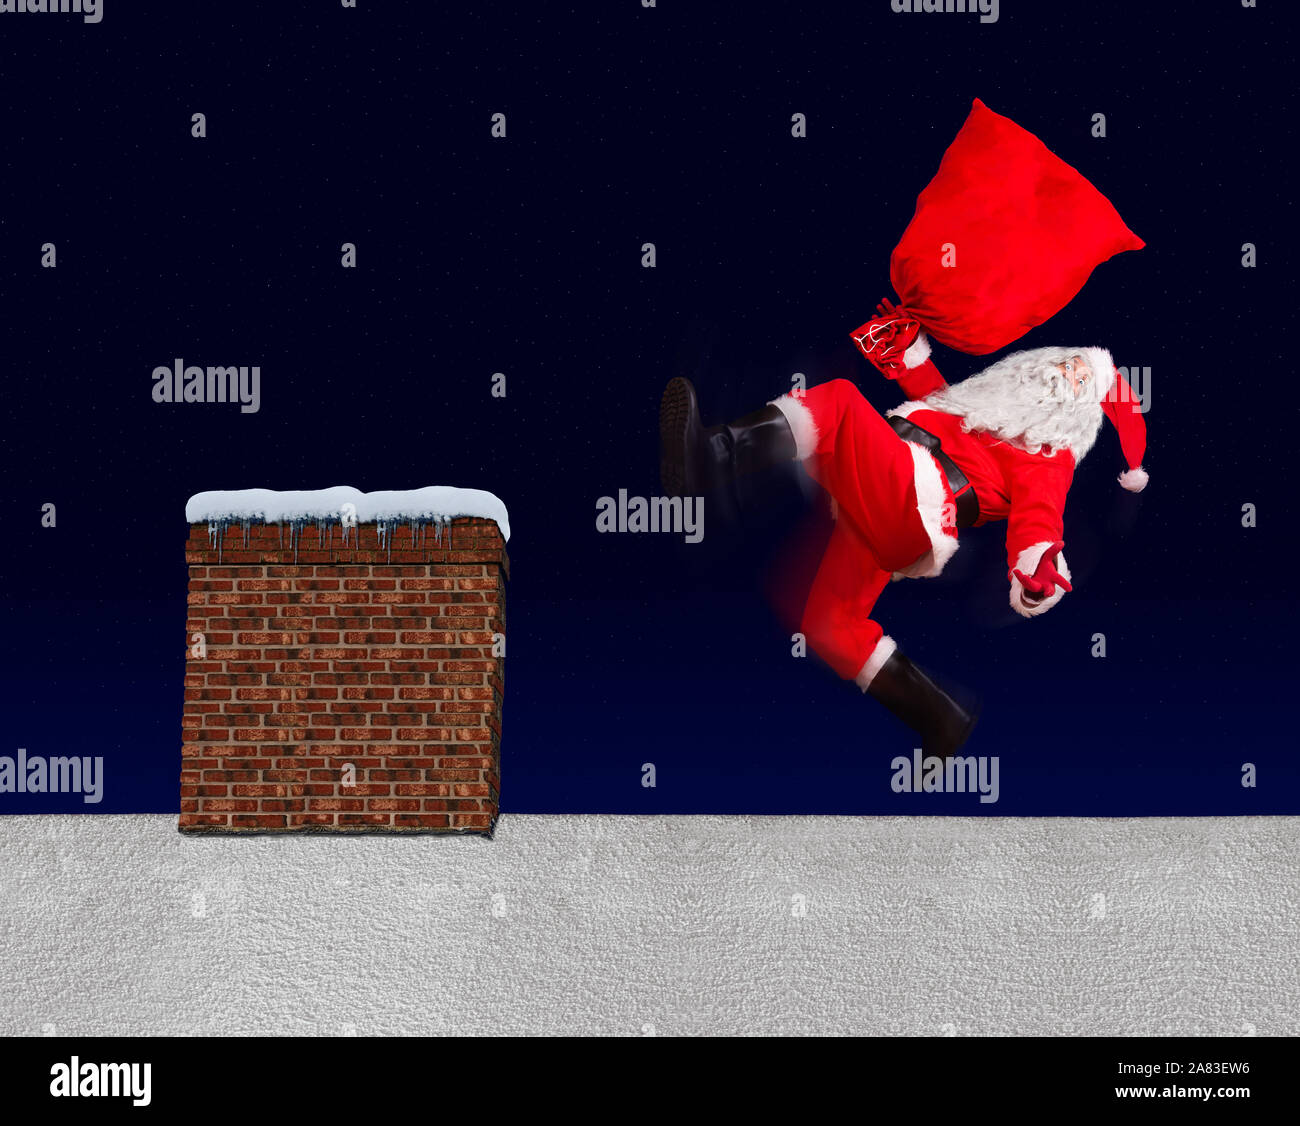 The unhappy Santa Claus slipped with bag on a snowy roof with the chimney. Santa Claus accident while distributing a gift. The Christmas disaster on a Stock Photo